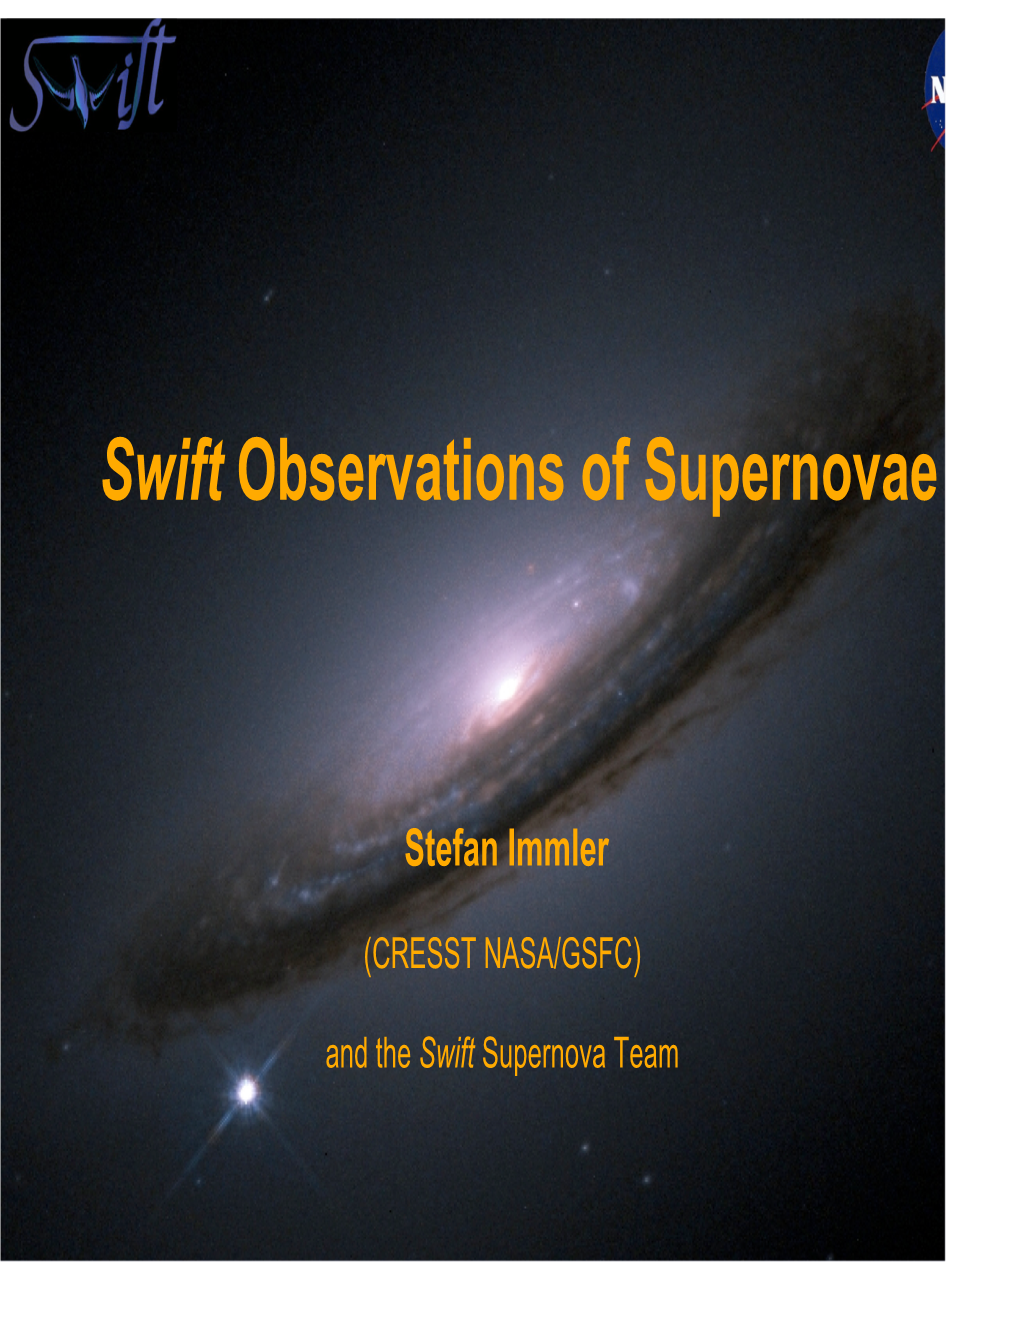 Swift Observations of Supernovae